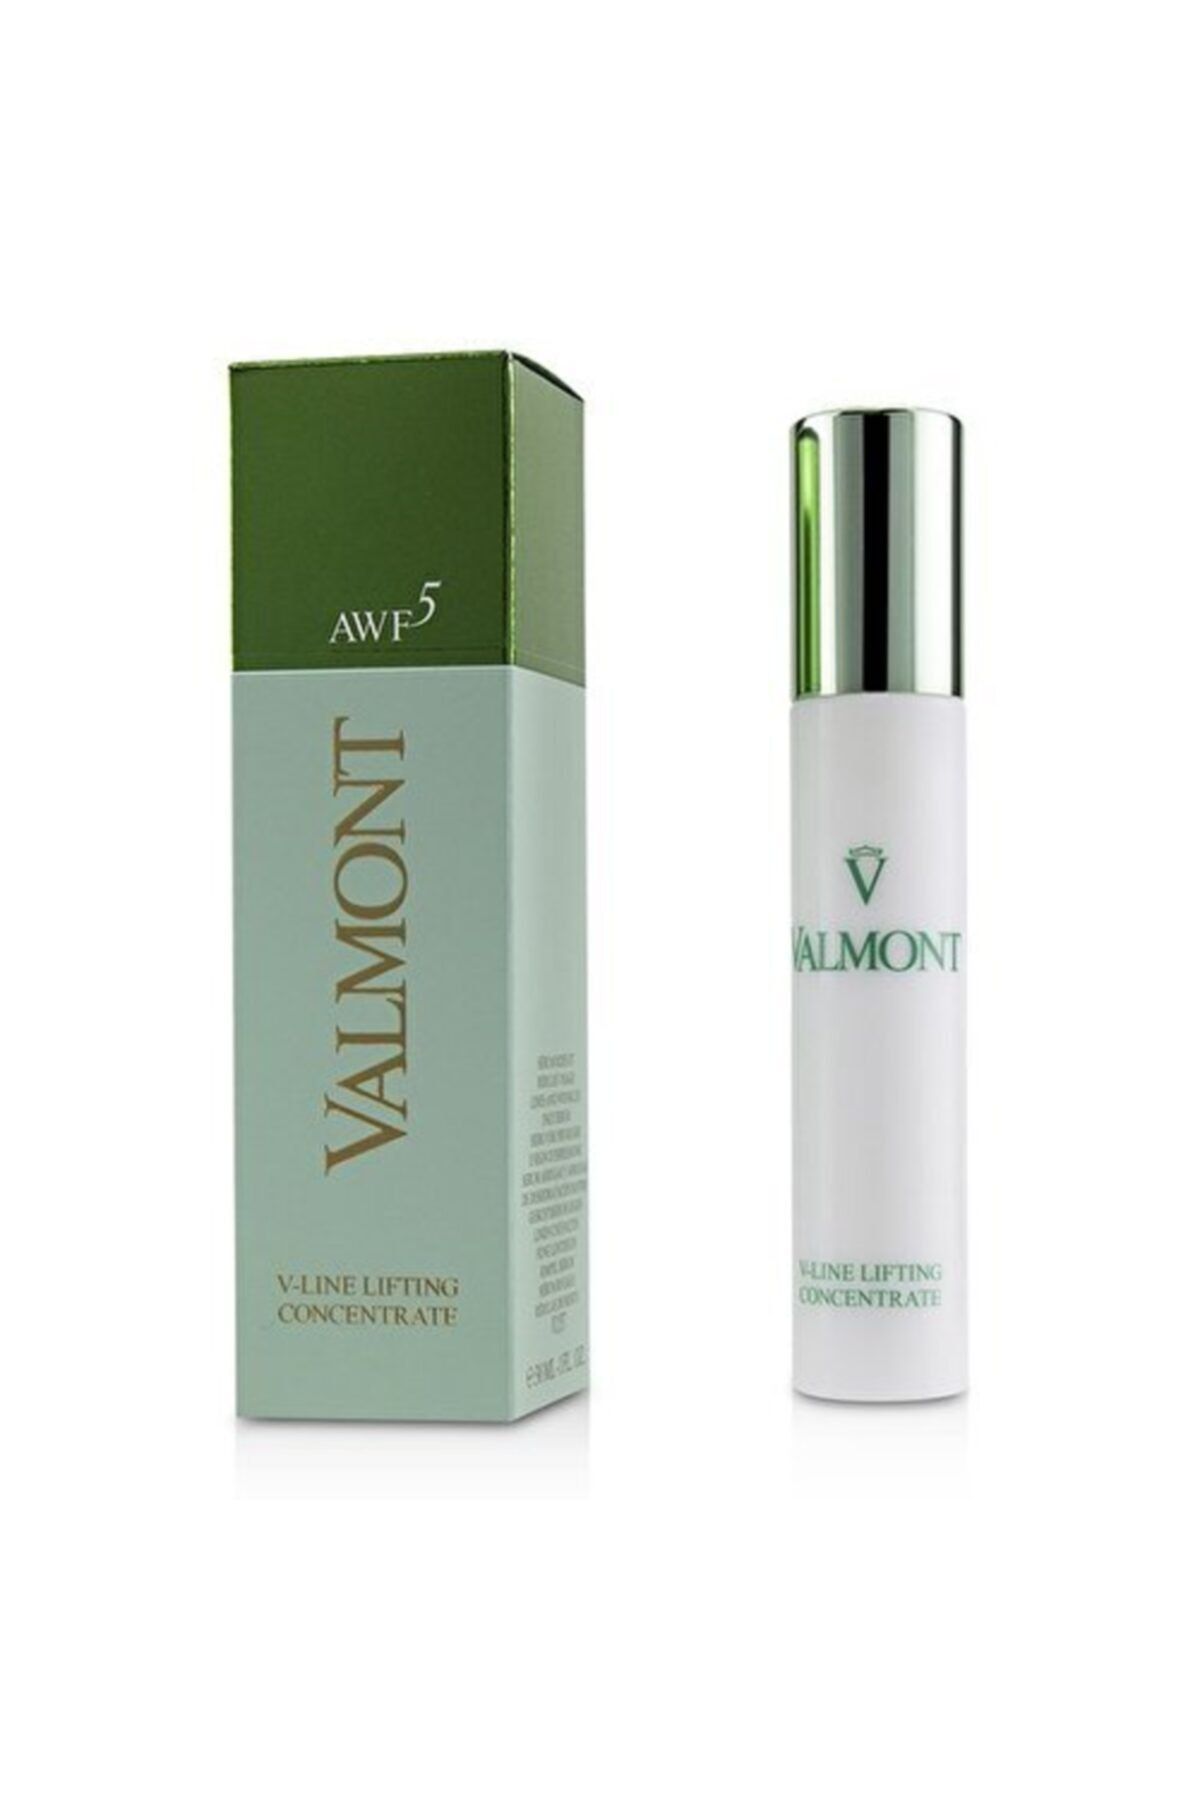 Valmont V-line Lifting Concentrate 30ml. Serum